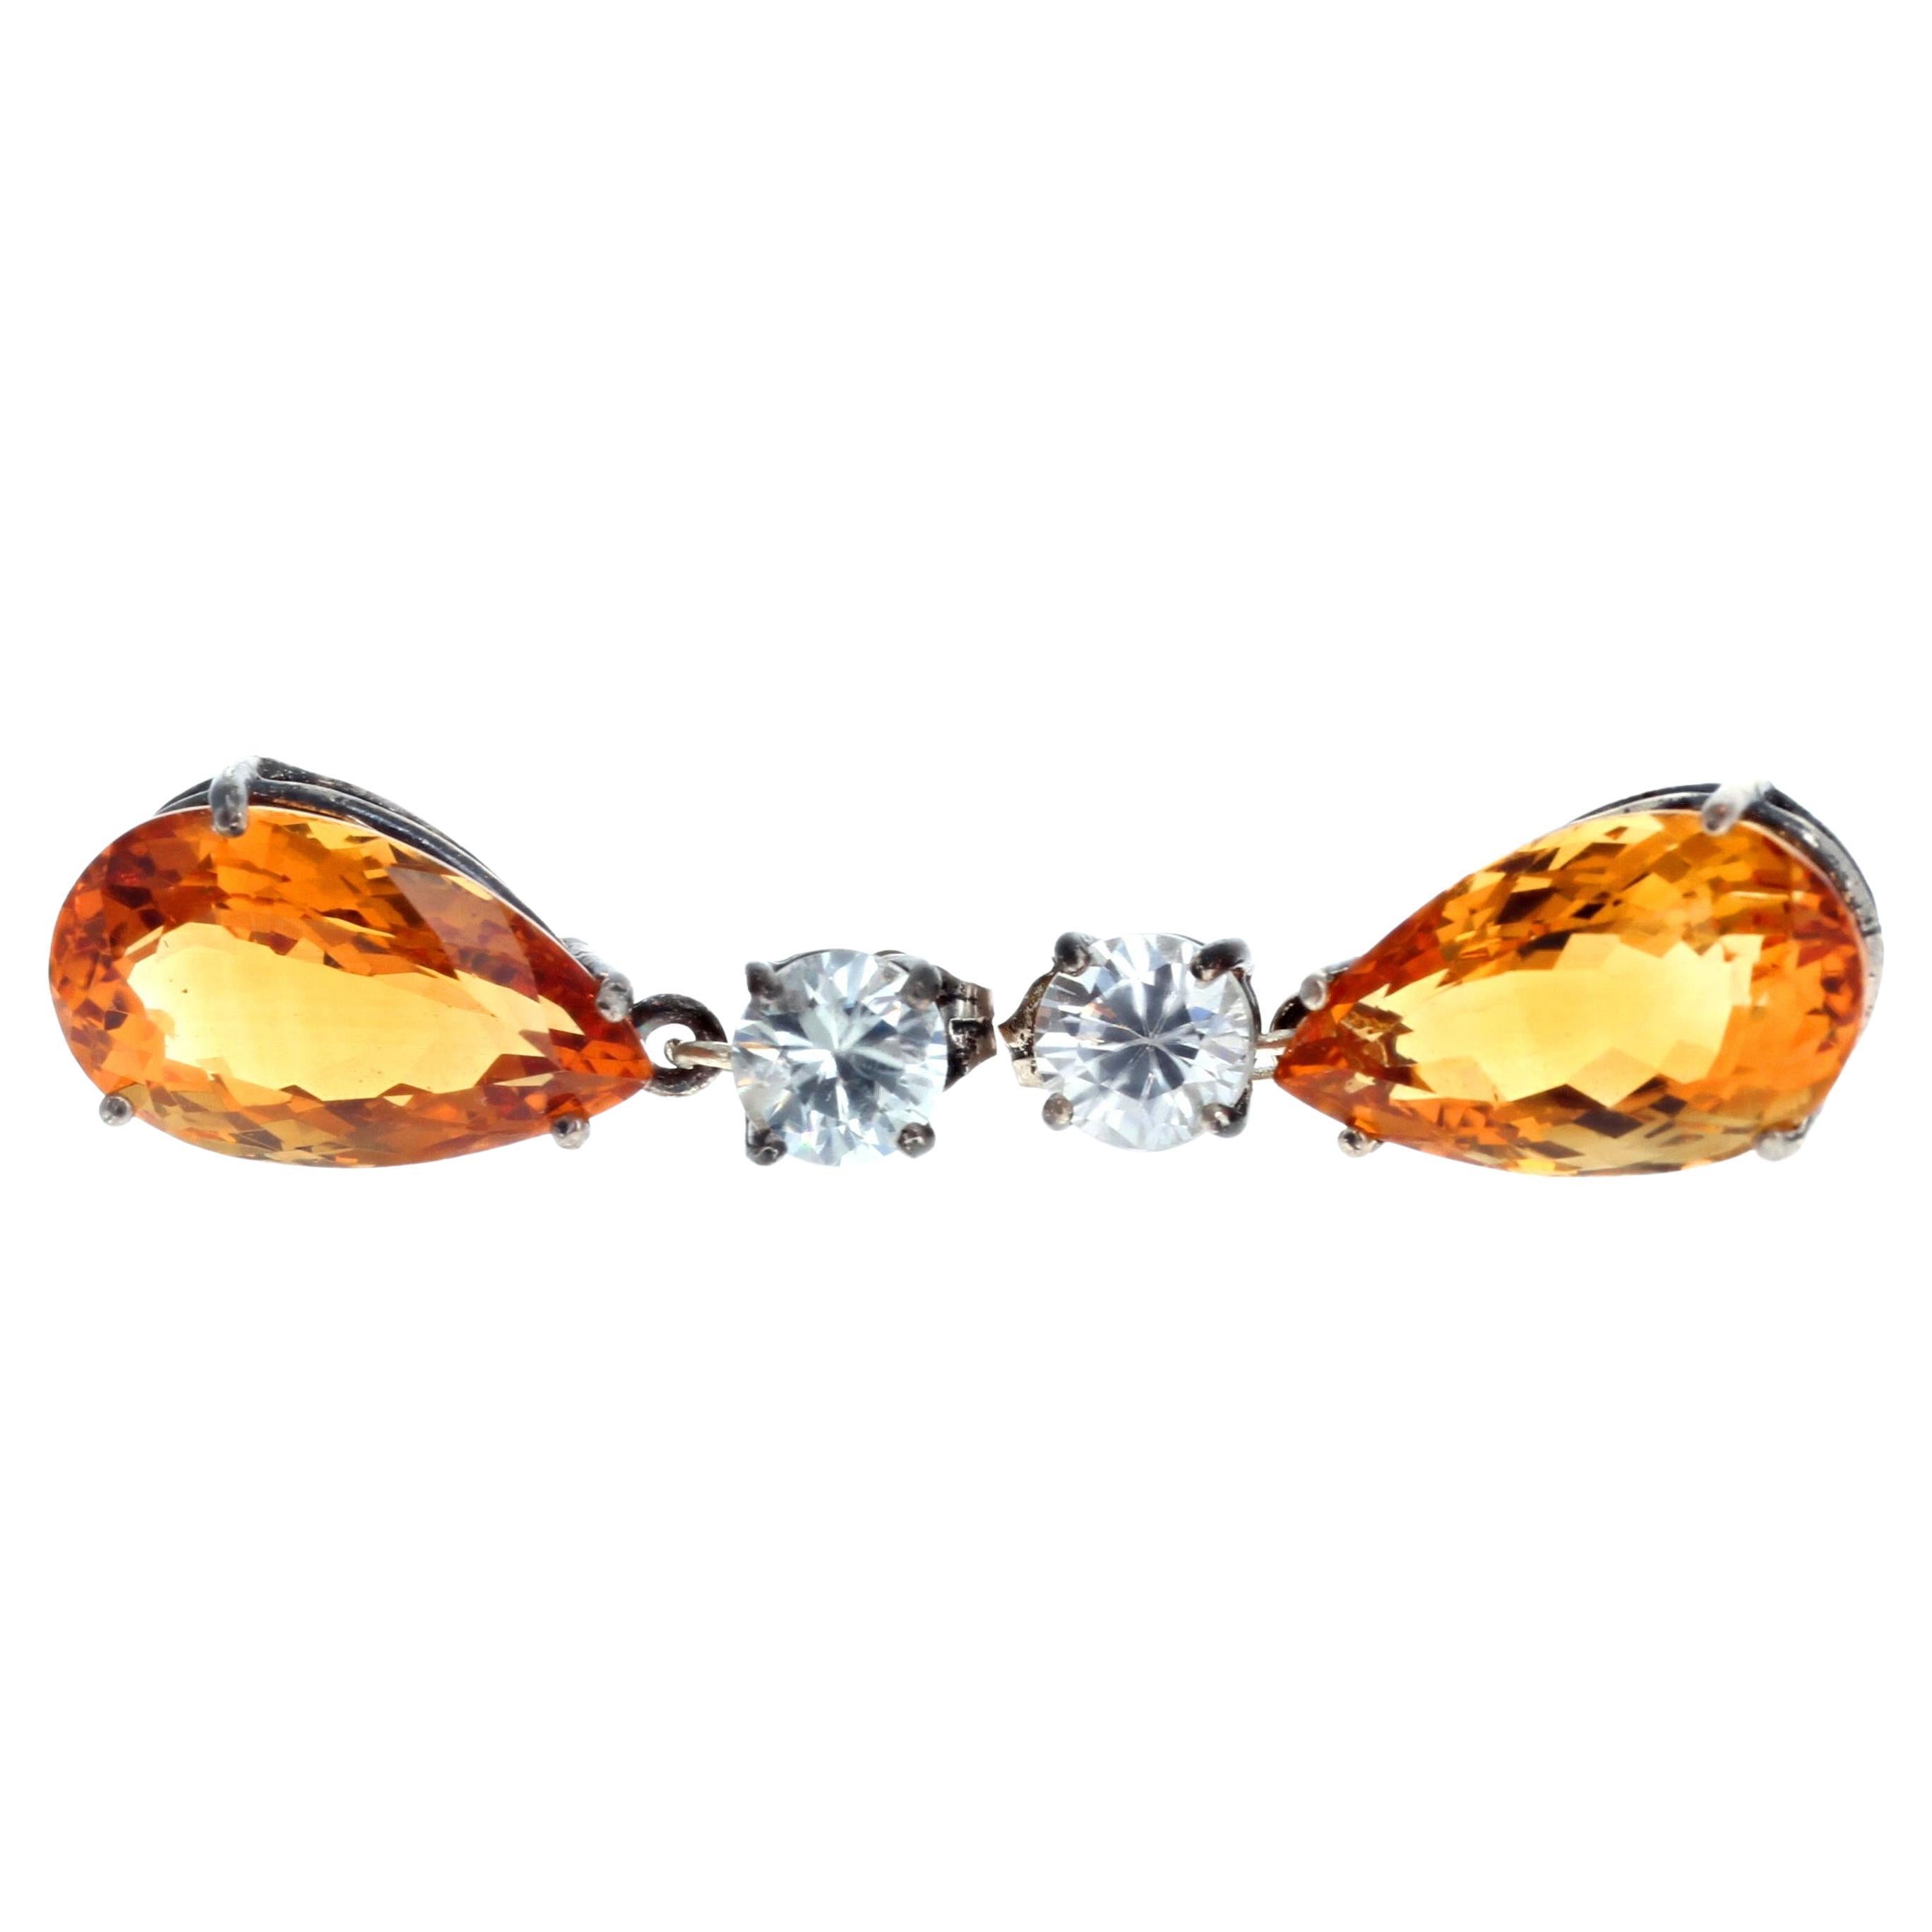 AJD Beautiful Glittering Citrine and Natural White Zircon Earrings For Sale